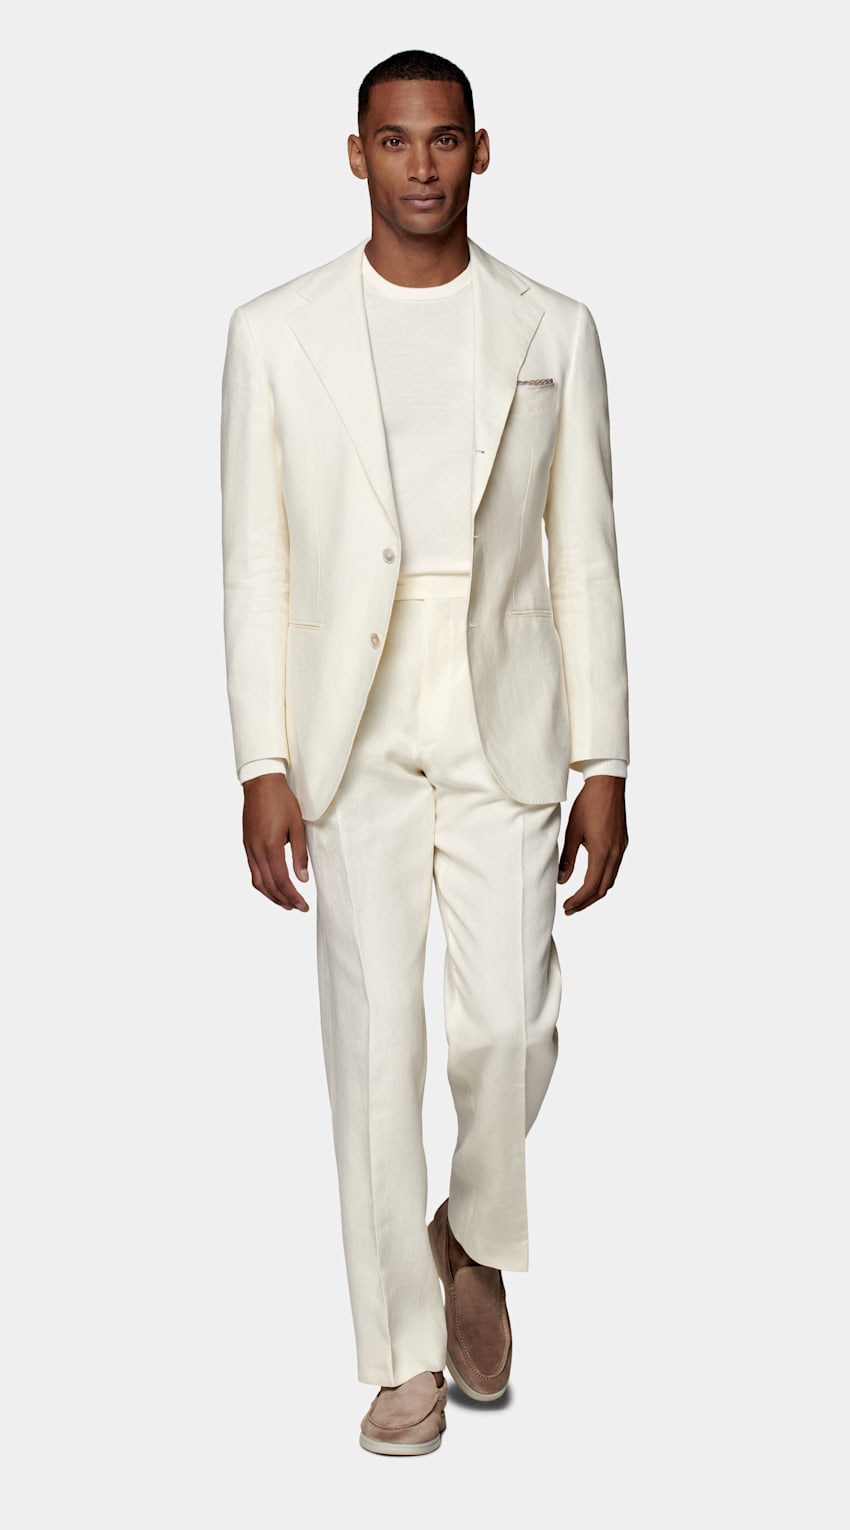 SUITSUPPLY Pure Linen by Baird McNutt, United Kingdom Off-White Roma Suit